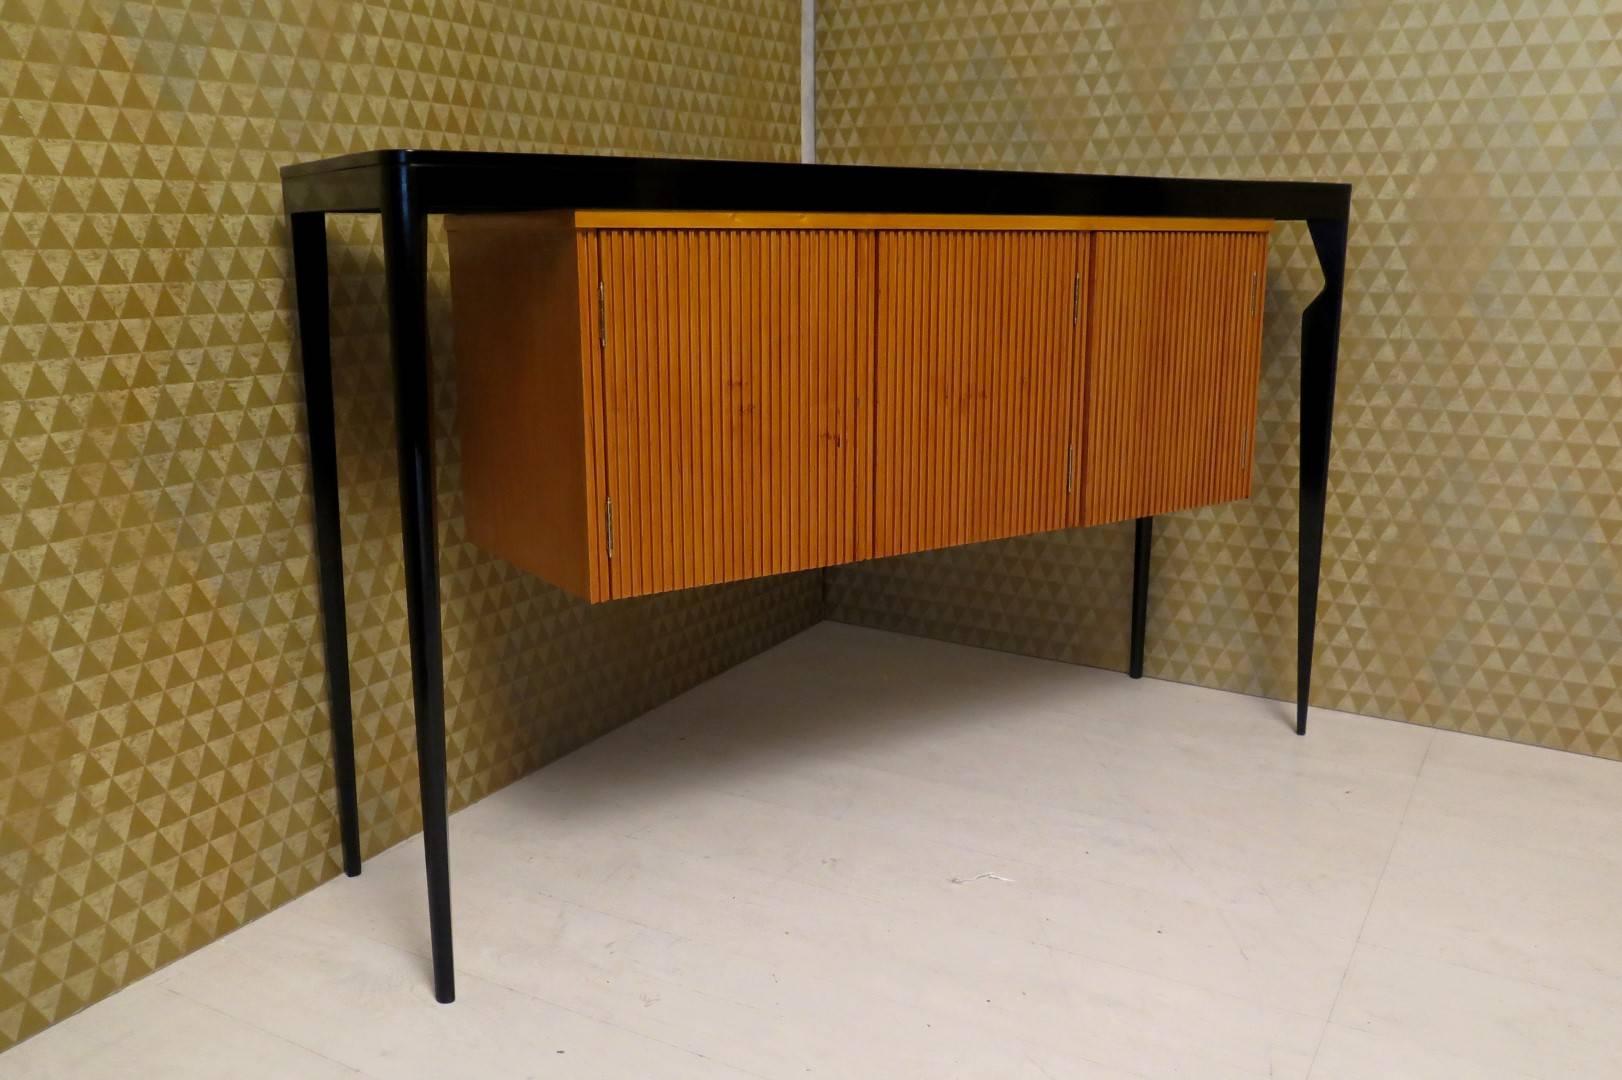 Glamorous sideboard 1940s, top and legs lacquered black. Central part in cherrywood with three doors. Very very particular form of this sideboard and its design, fine its four legs, and a central body 